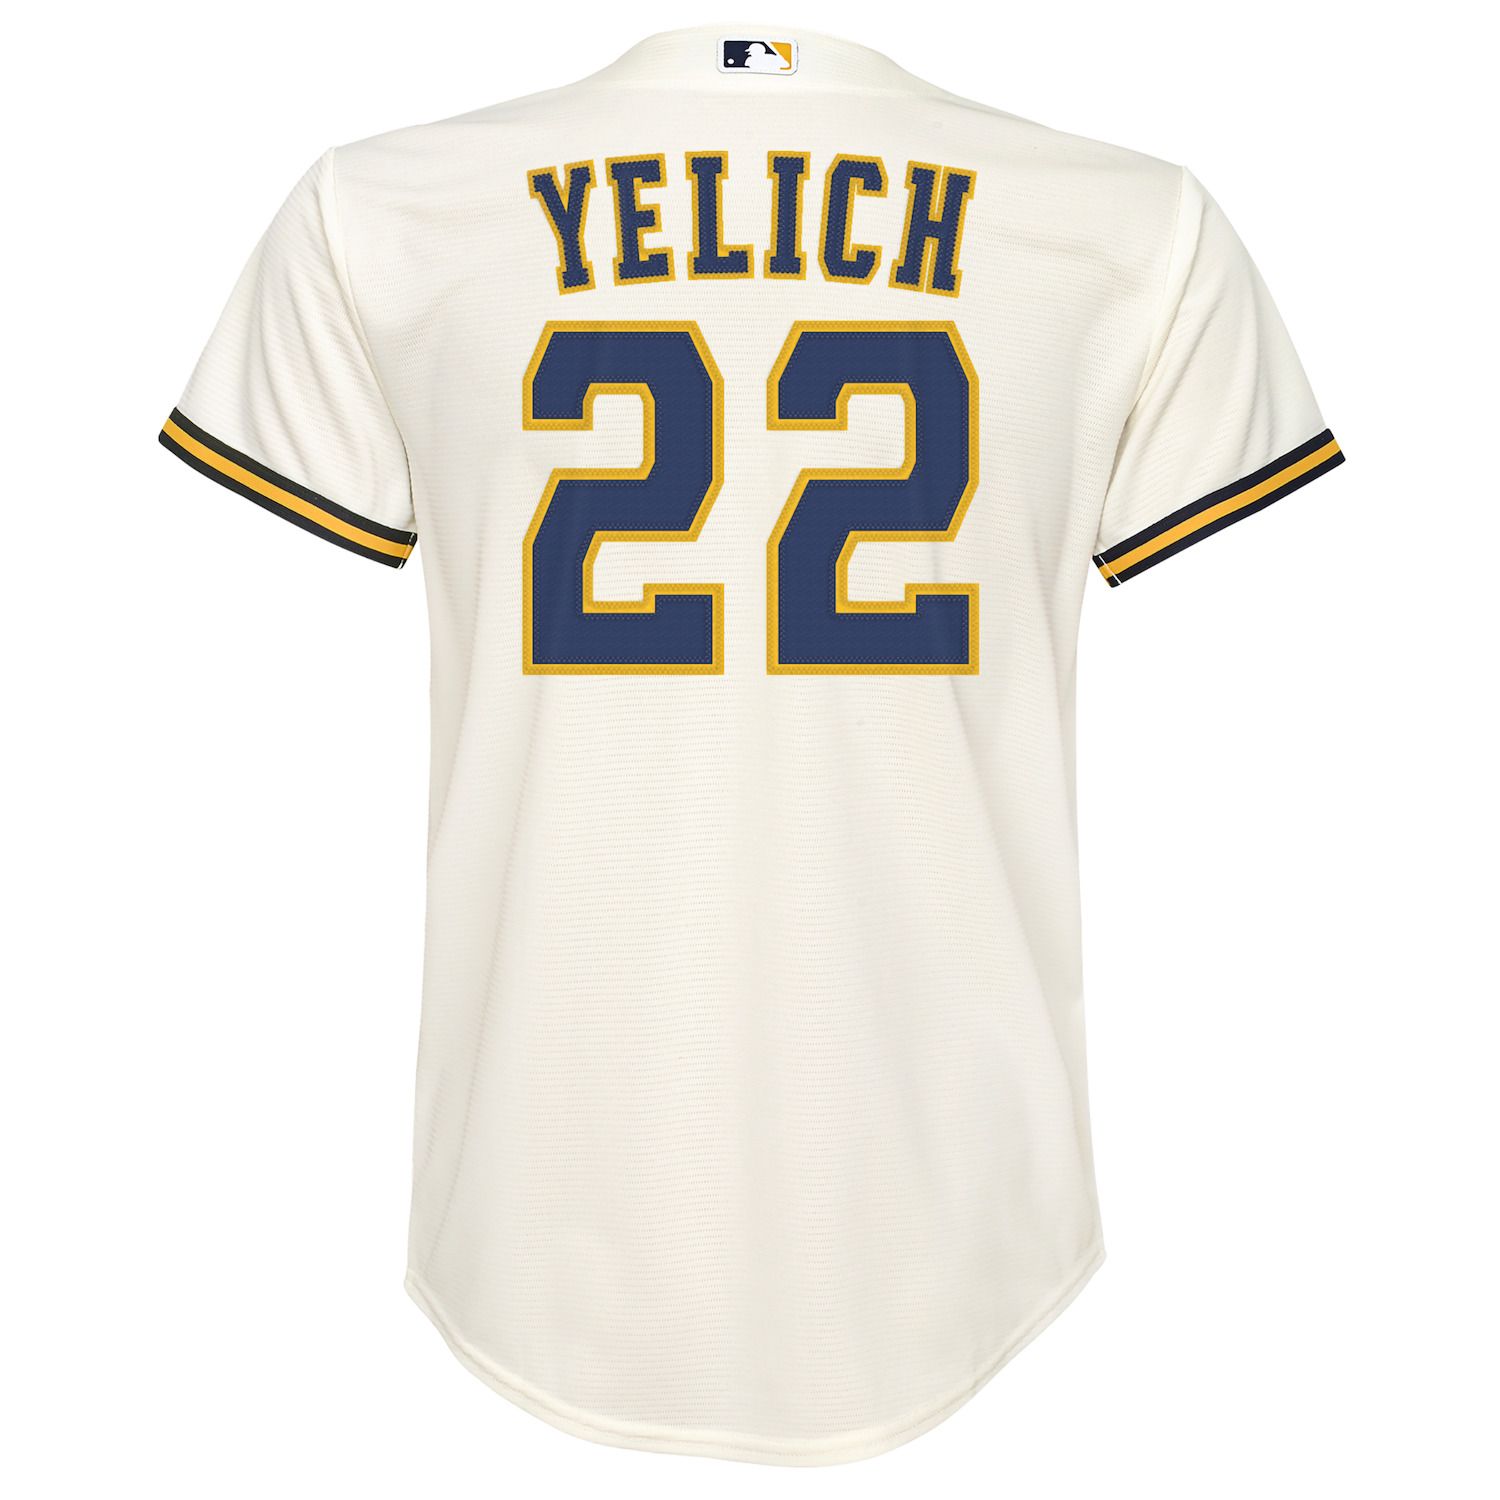 yelich jersey youth